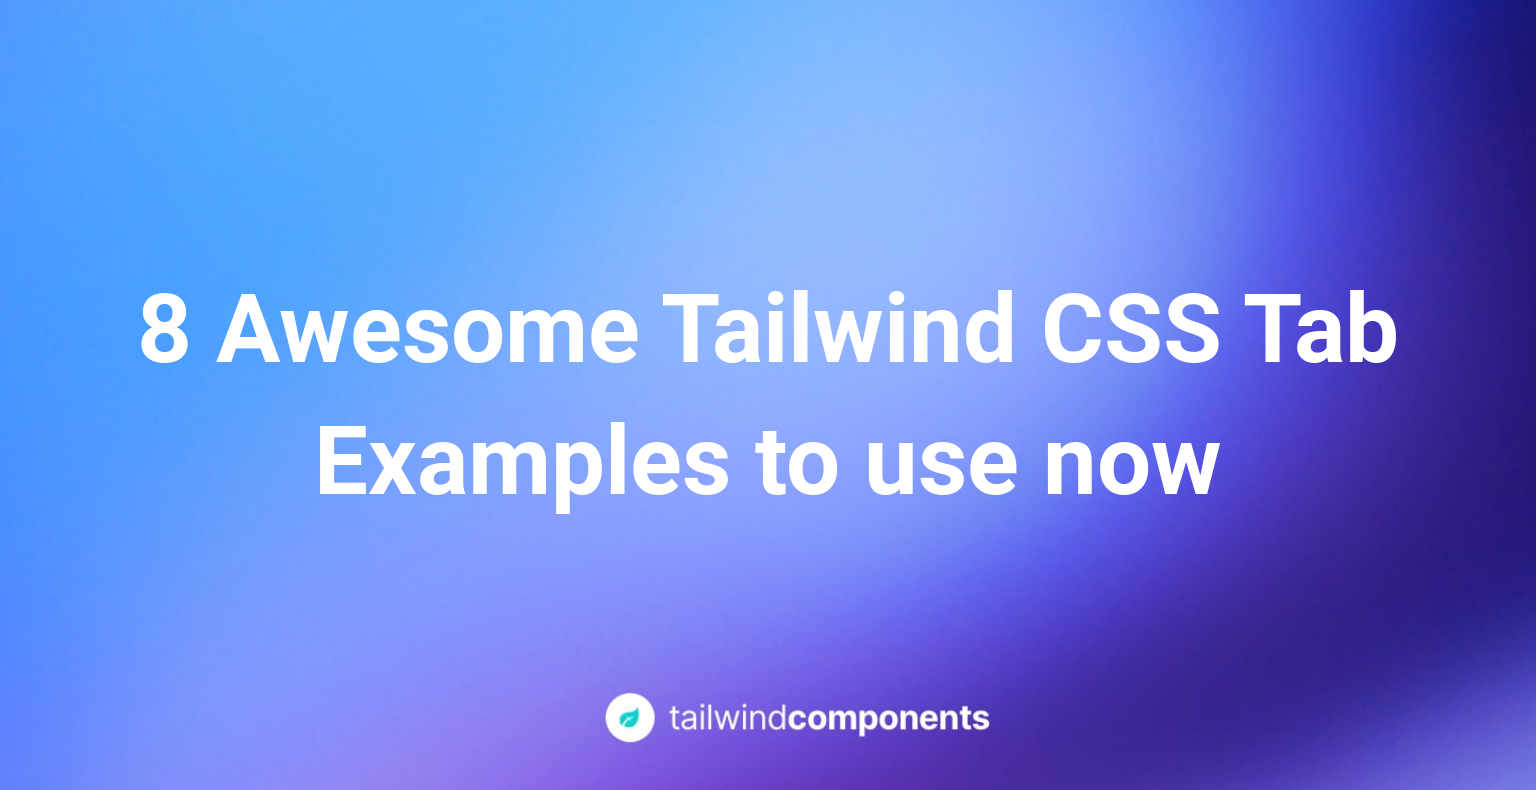 8 Awesome Tailwind CSS Tab Examples to use now